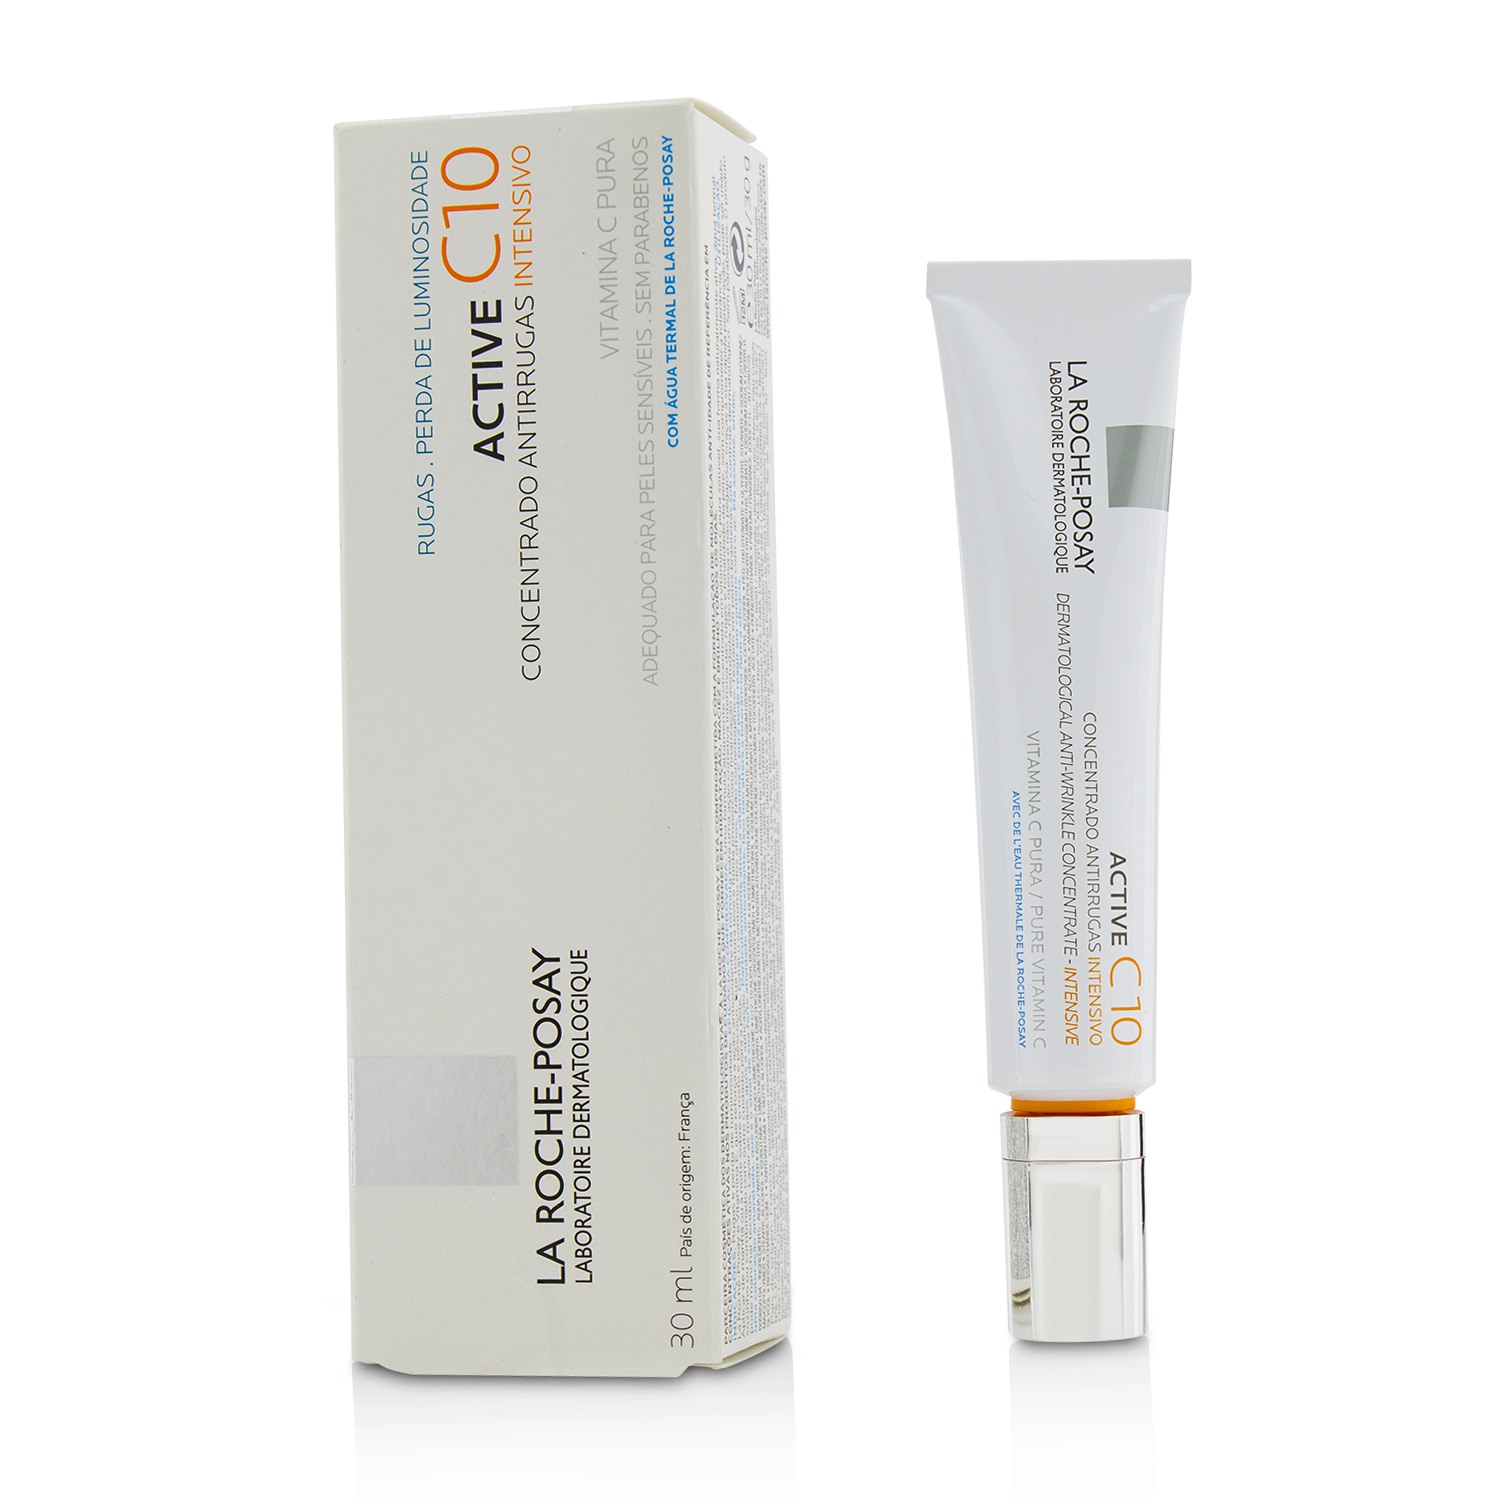 Active C10 Dermatological Anti-Wrinkle Concentrate - Intensive La Roche Posay Image